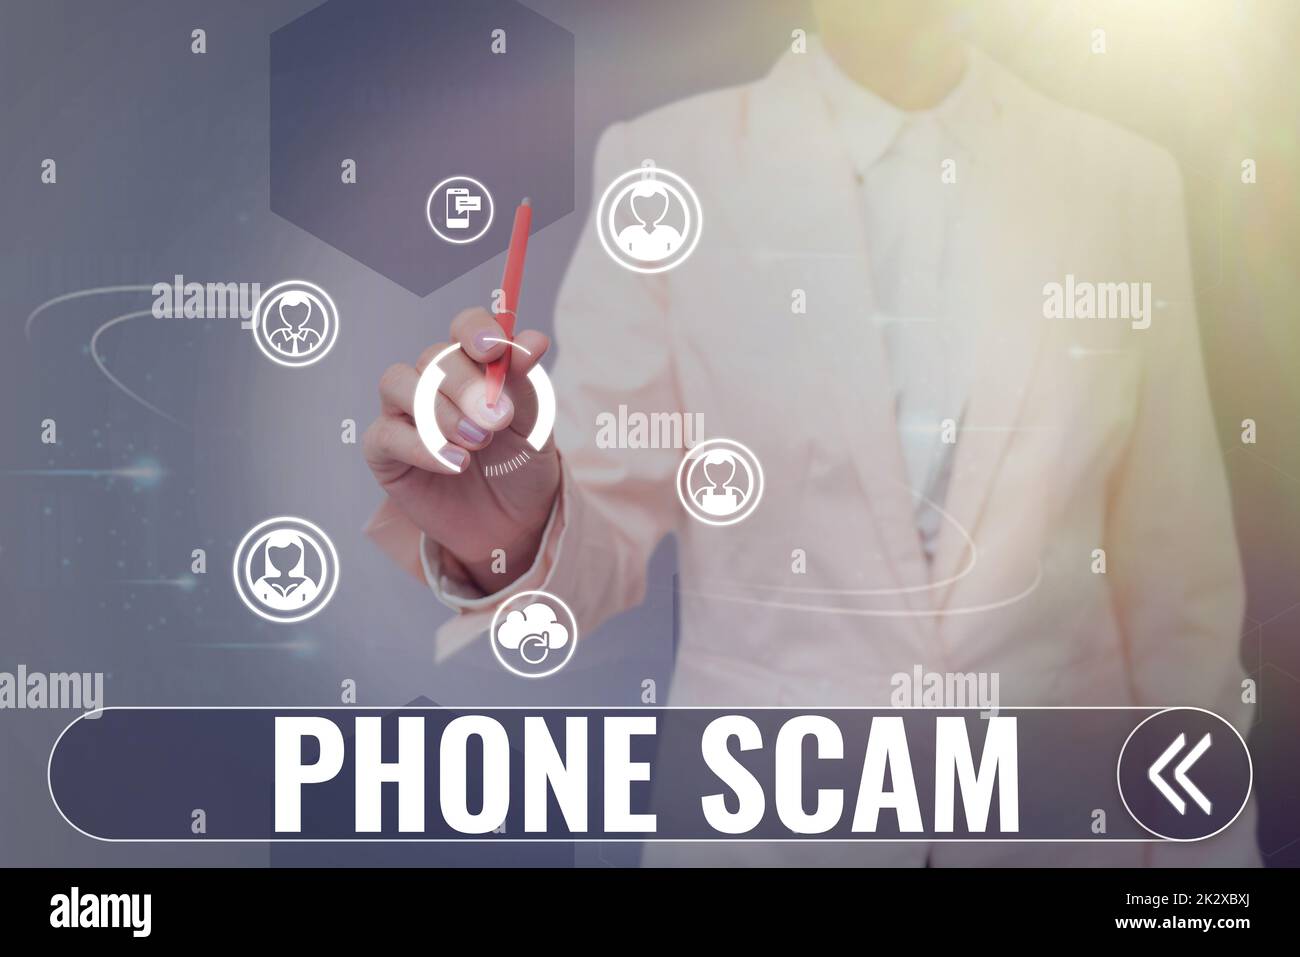 Handwriting text Phone Scam. Word Written on getting unwanted calls to promote products or service Telesales Lady in suit holding pen symbolizing successful teamwork accomplishments. Stock Photo